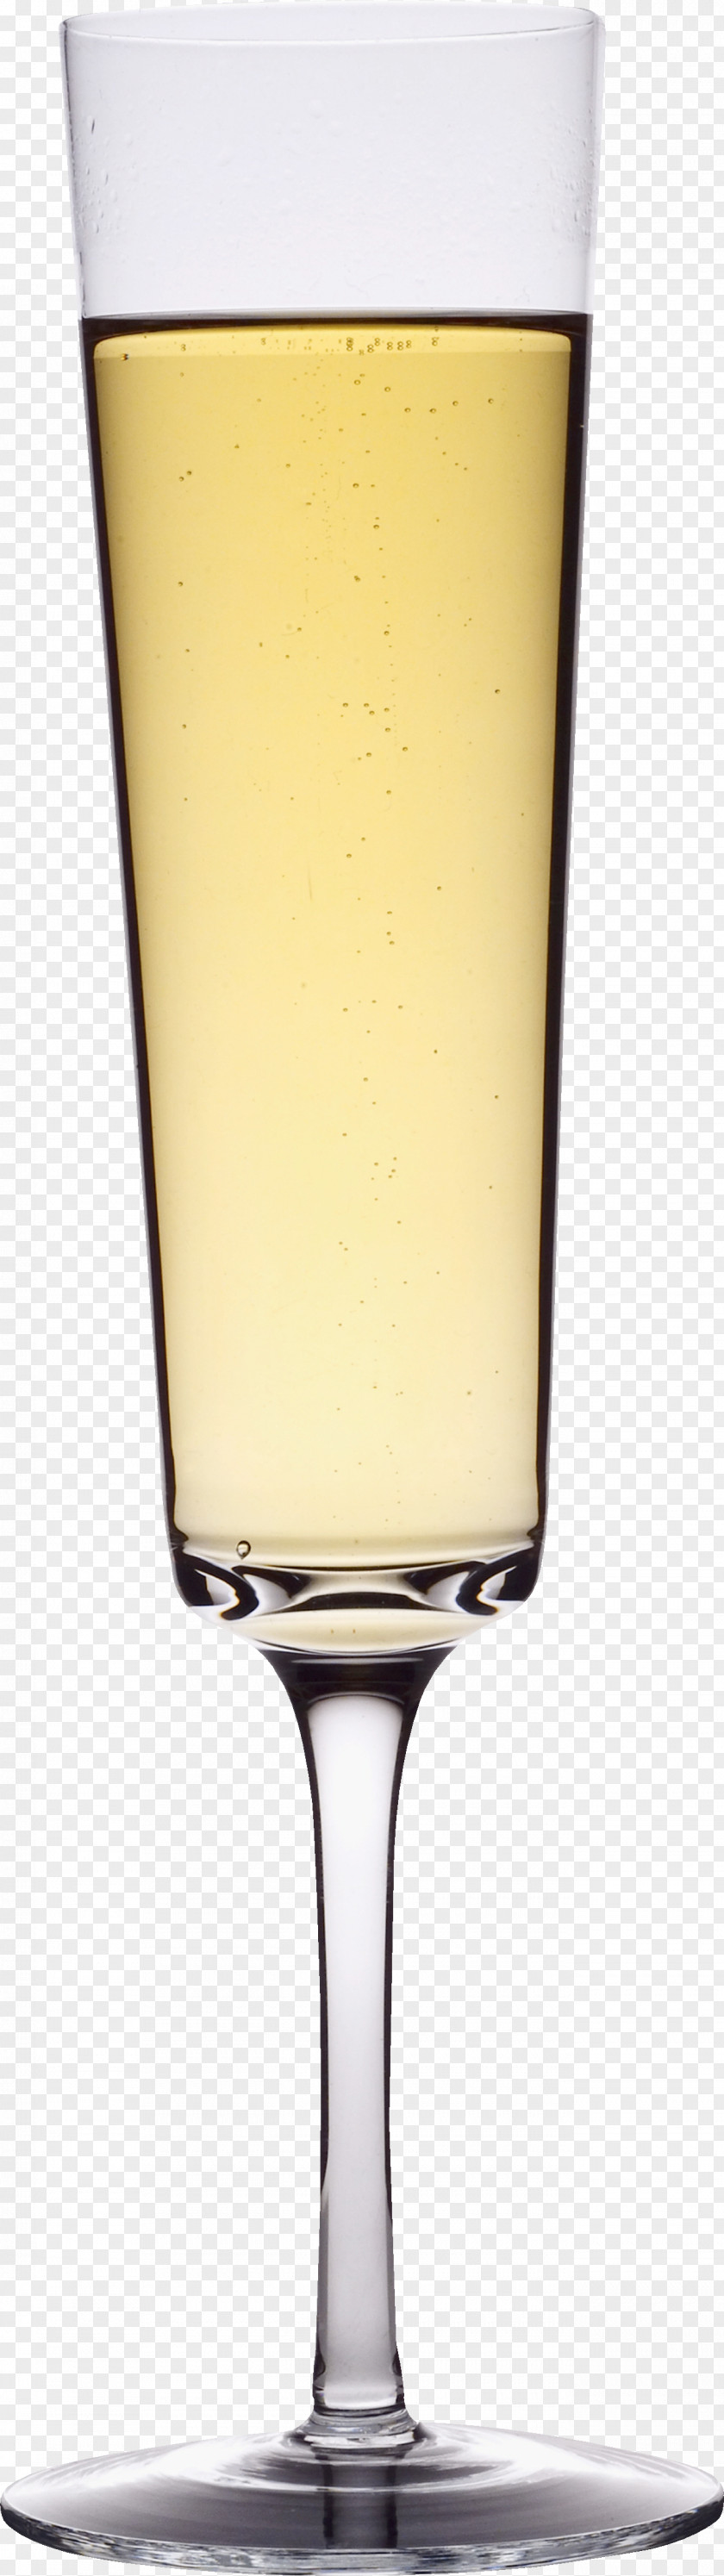 Glass Image Champagne Cocktail Wine PNG